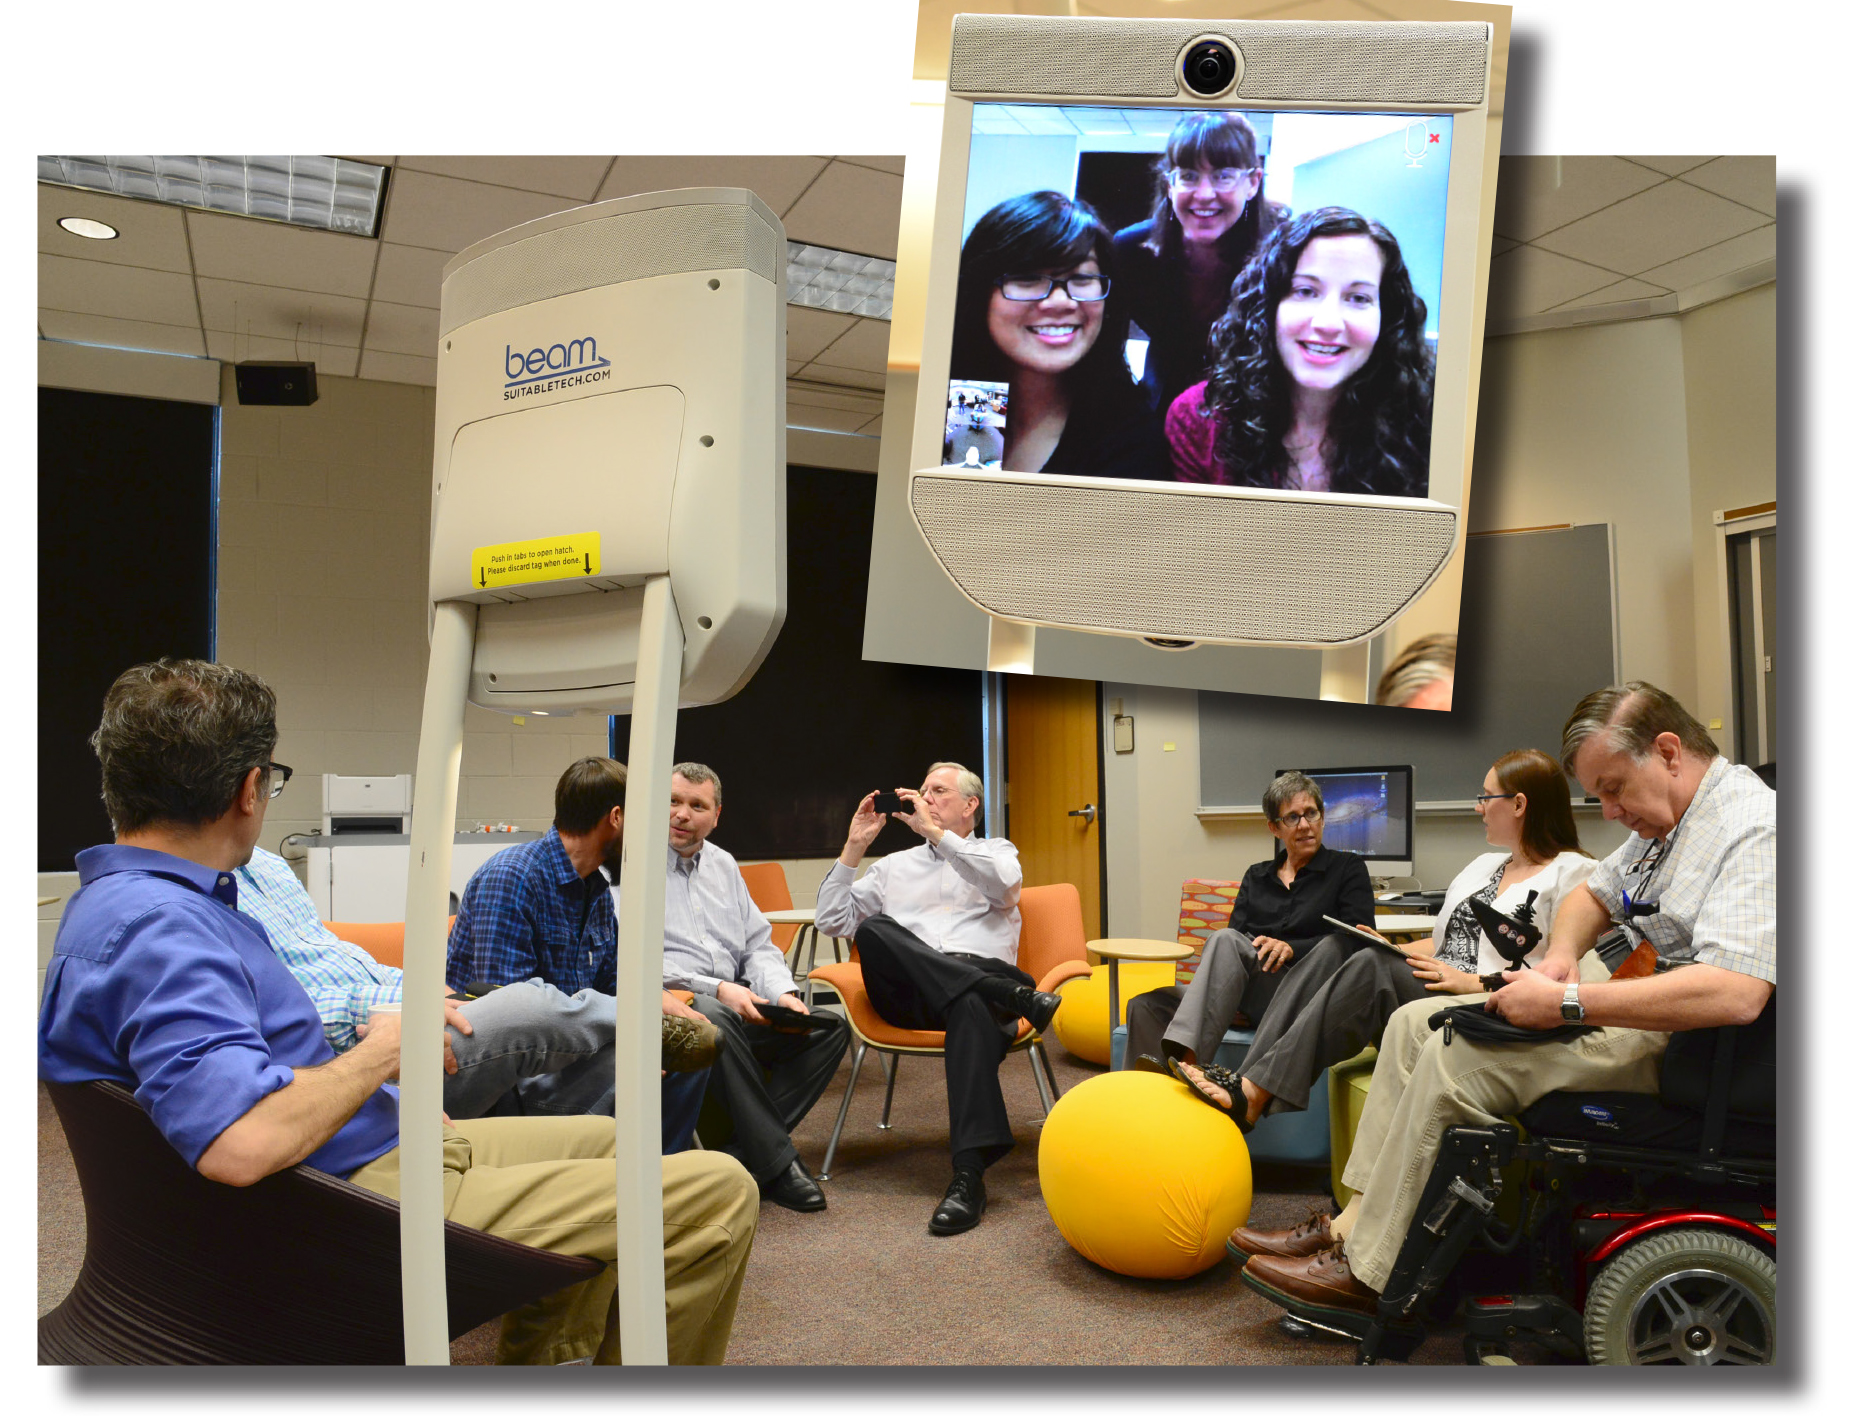 Students, staff, and faculty collaborate with offsite participants using a mobile videoconferencing device.